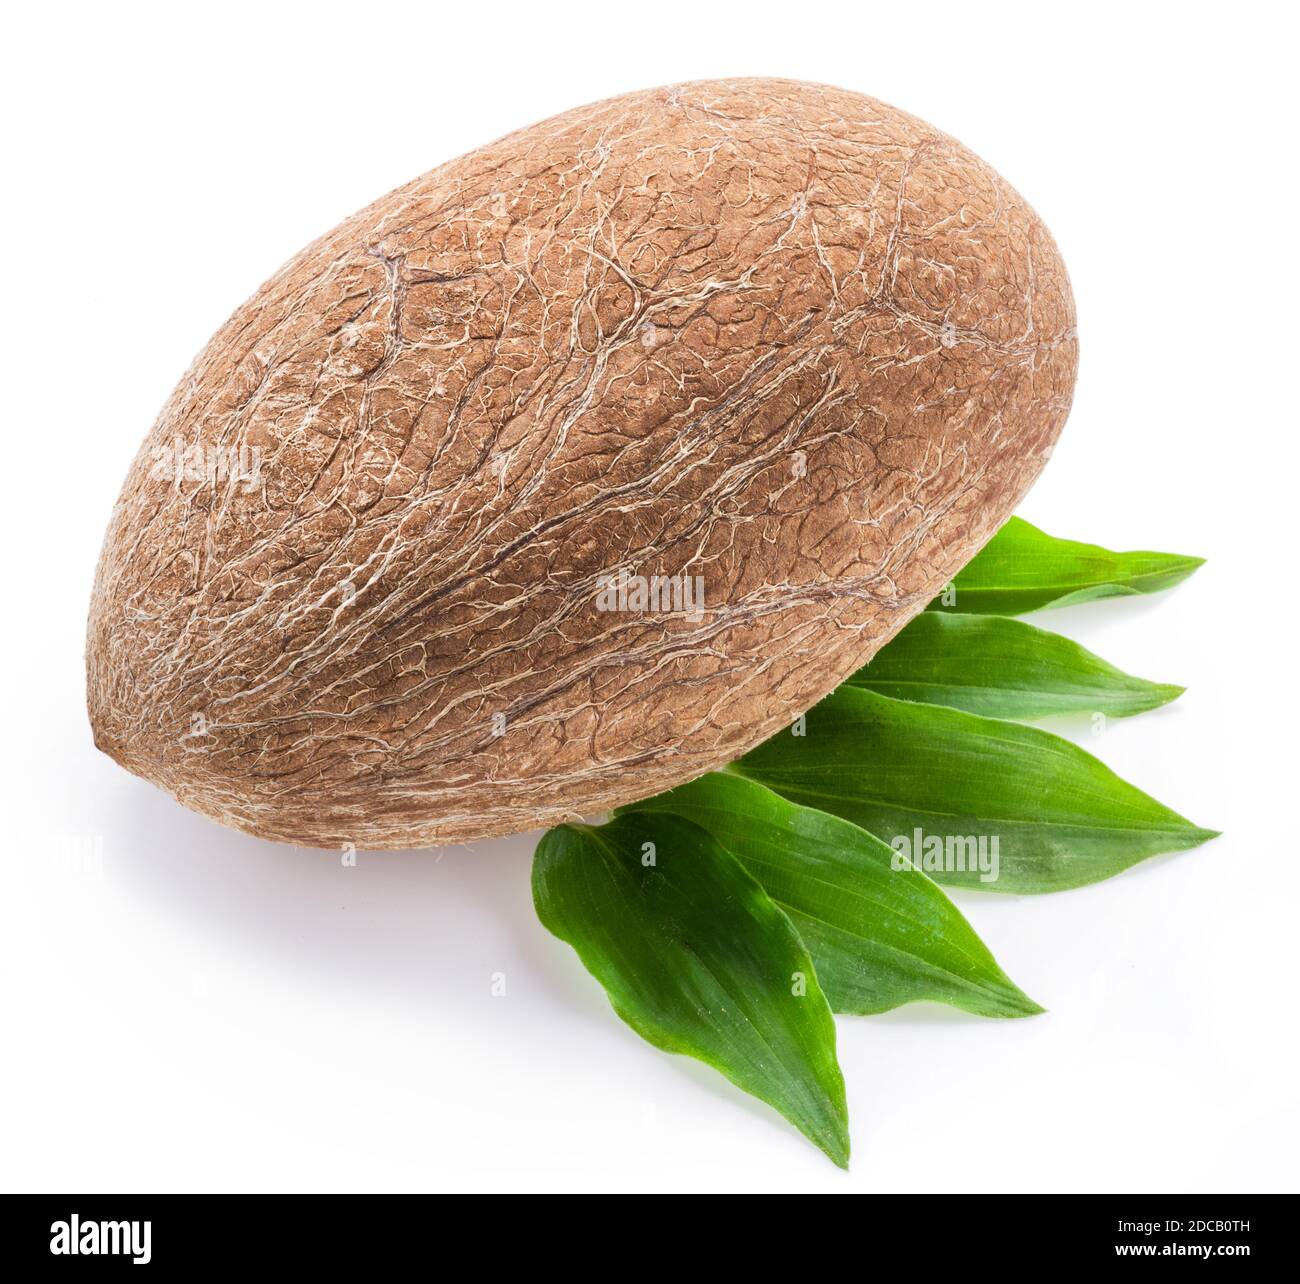 Peeled whole coconut seed with leaves isolated on white background. Stock Photo